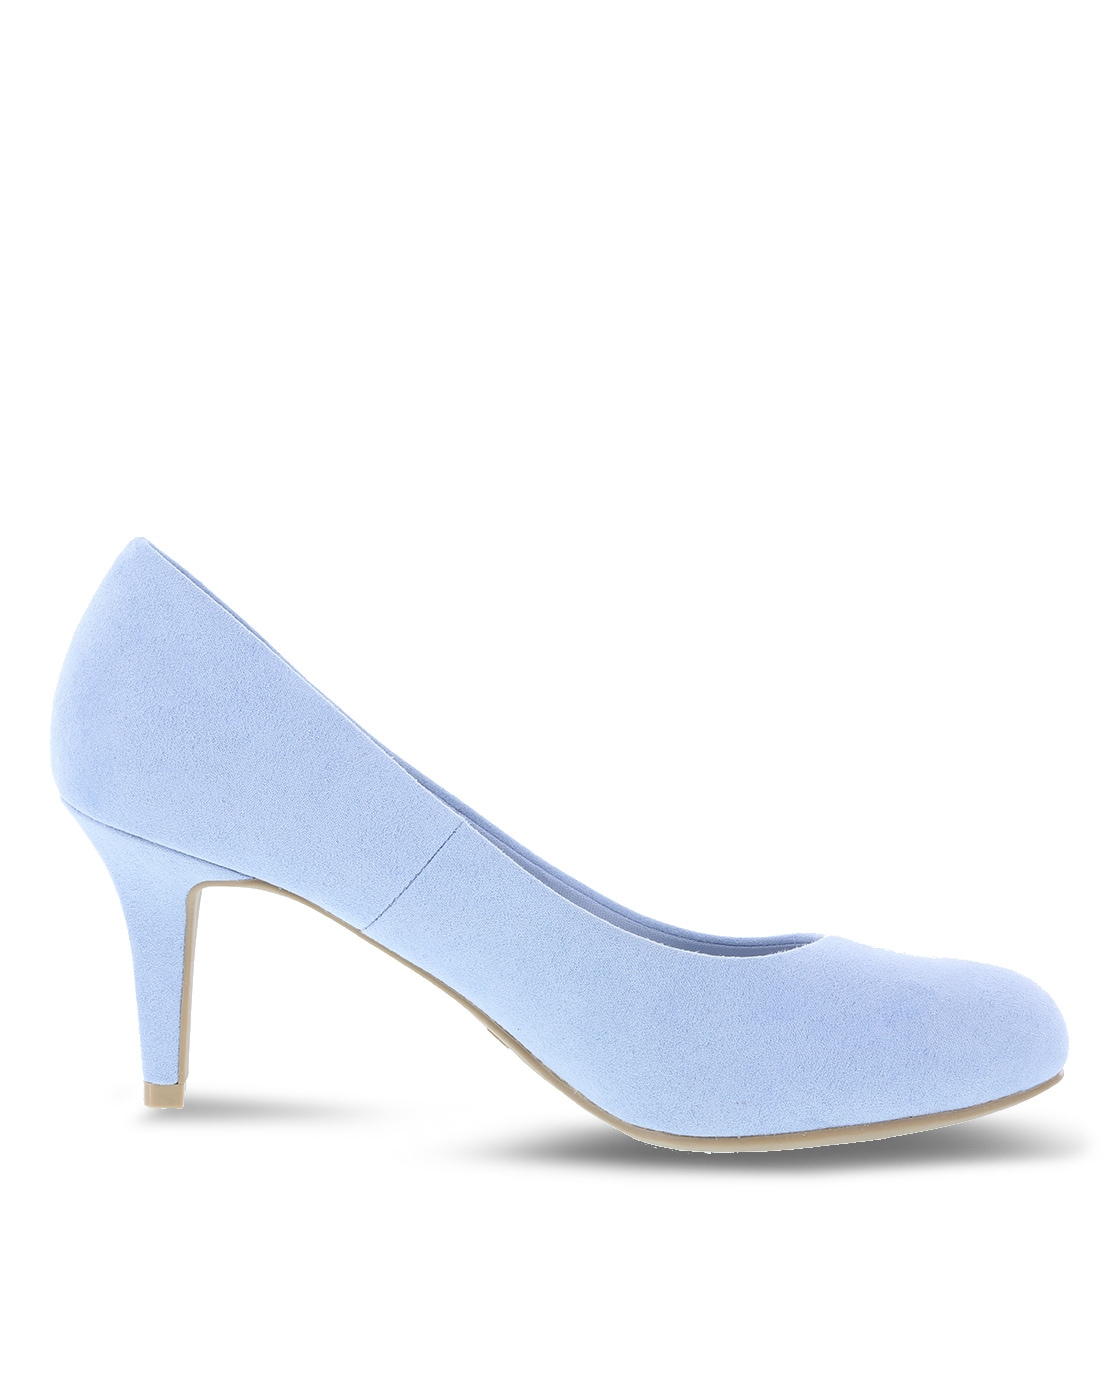 Buy Powder Blue Heeled Shoes for Women 